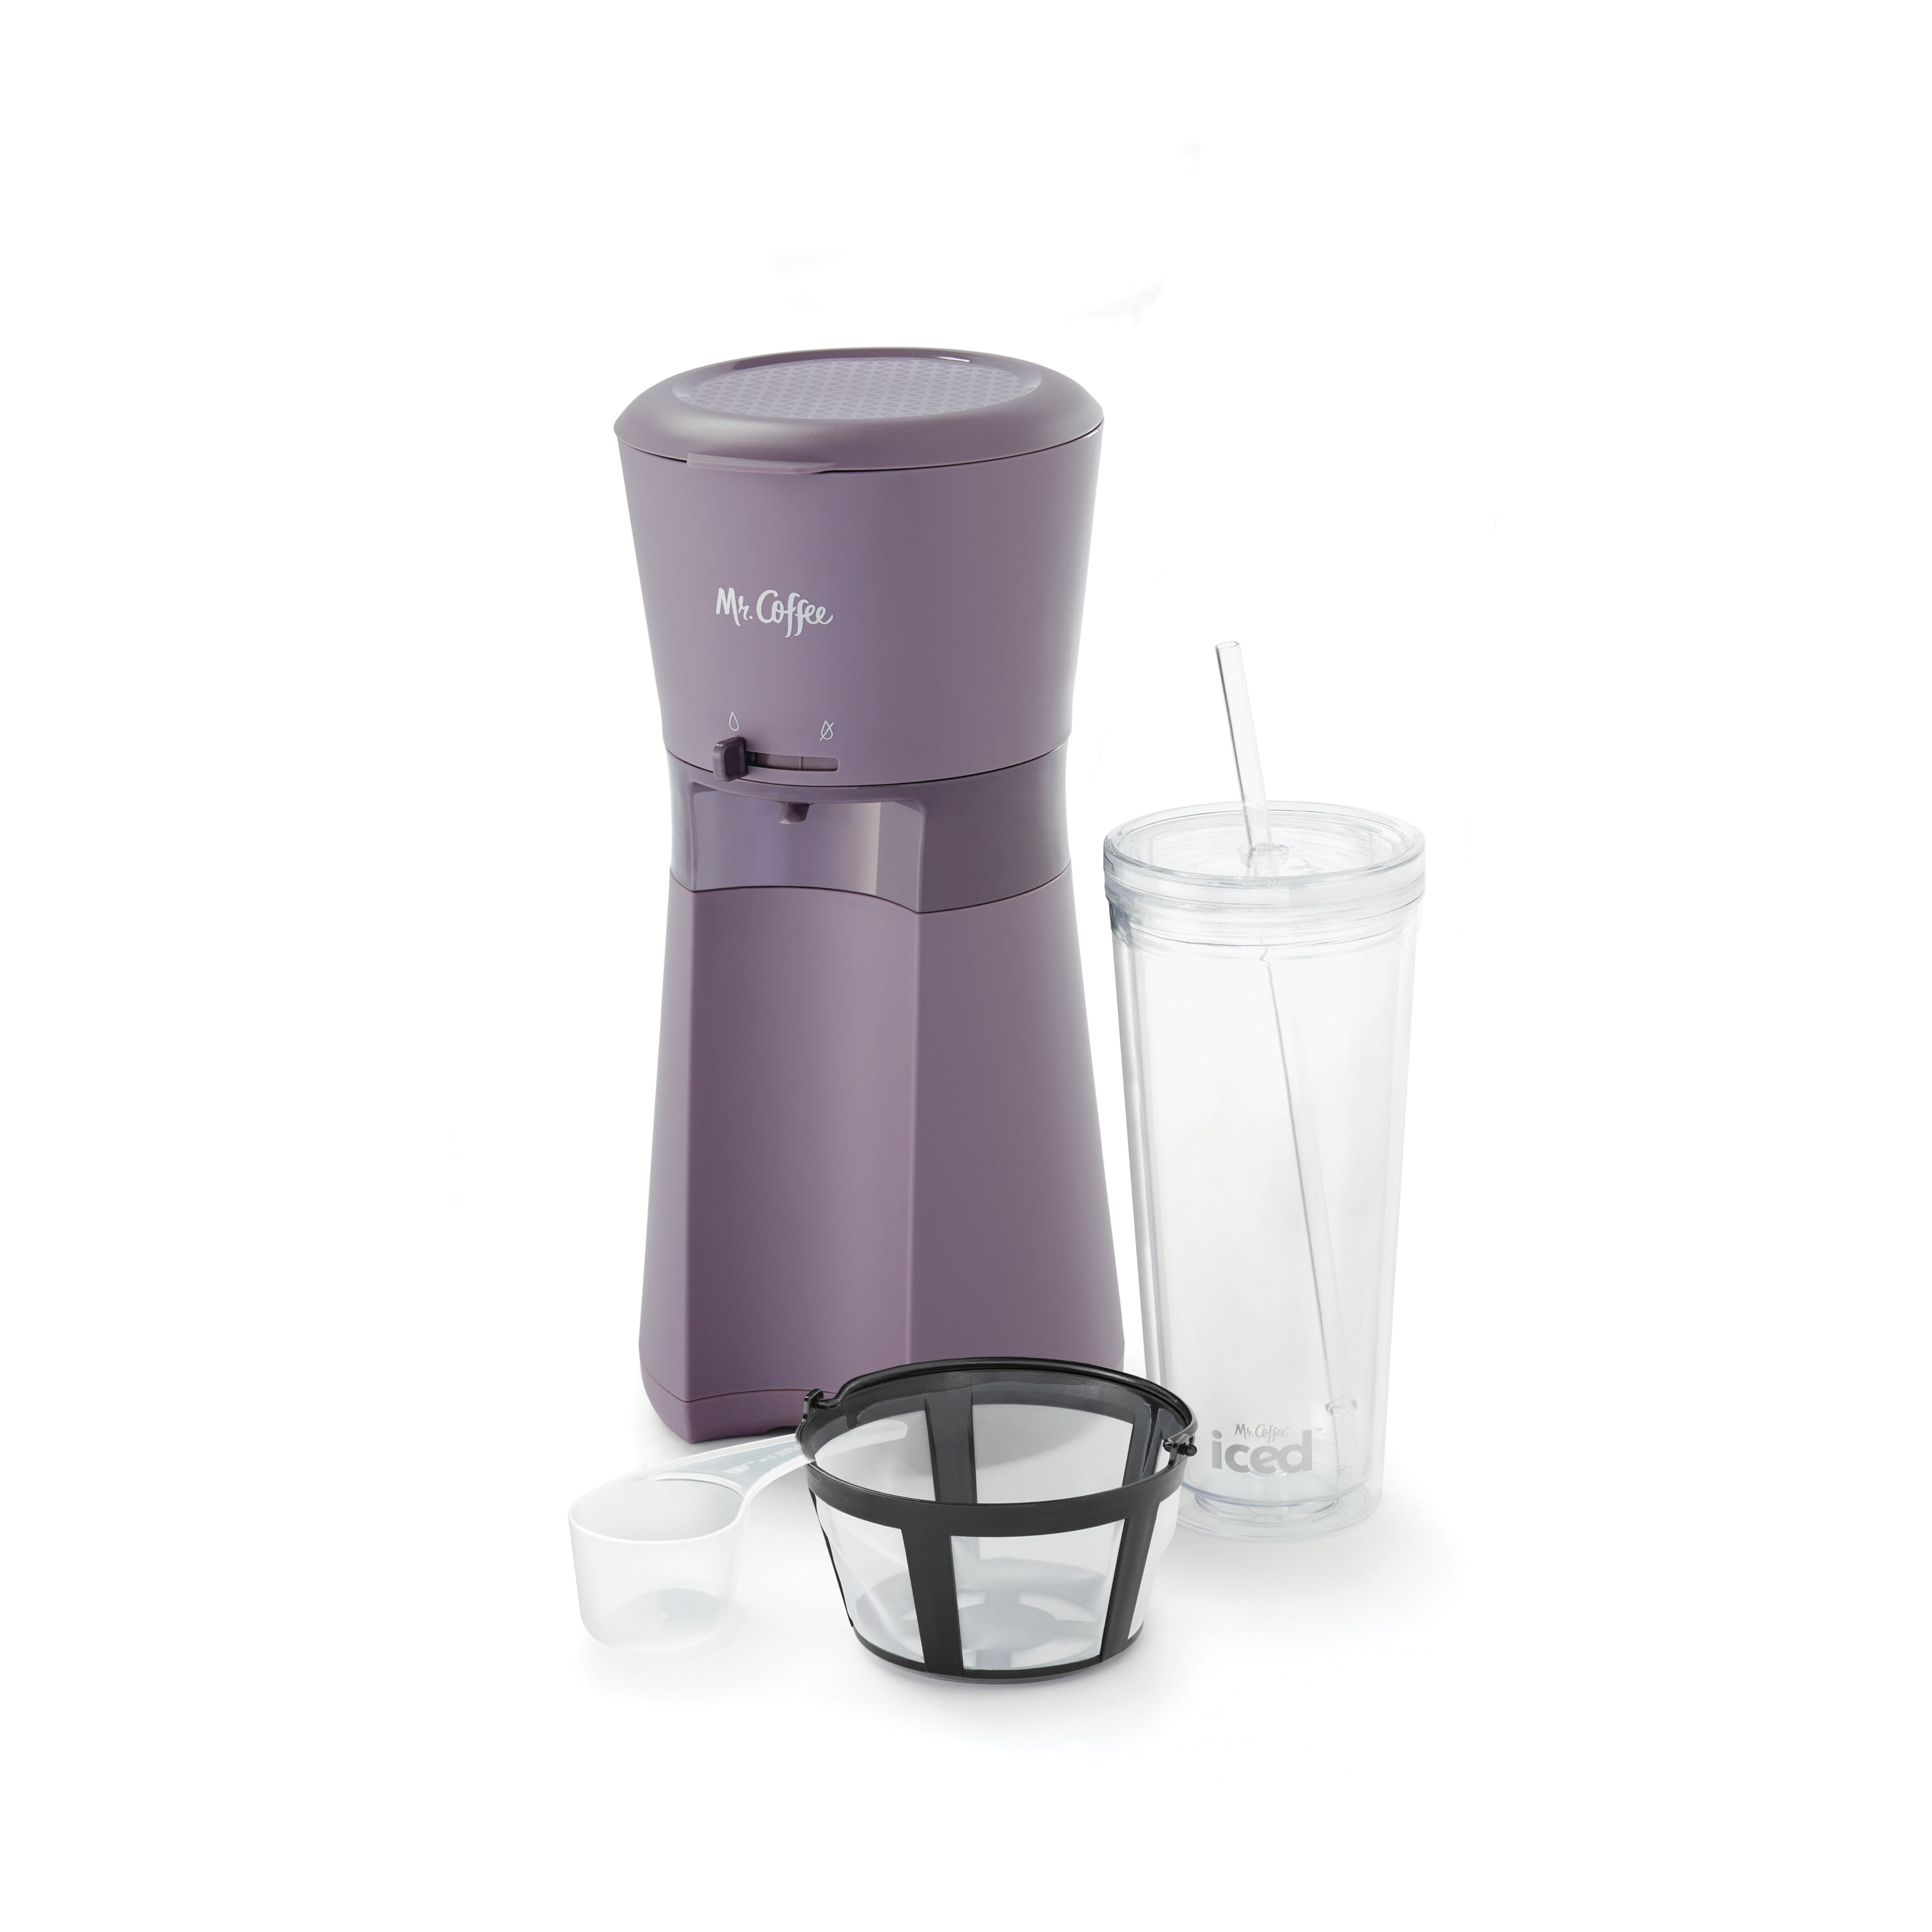 Mr Coffee Iced Coffee Maker with Reusable Tumbler and Coffee Filter Gray New 